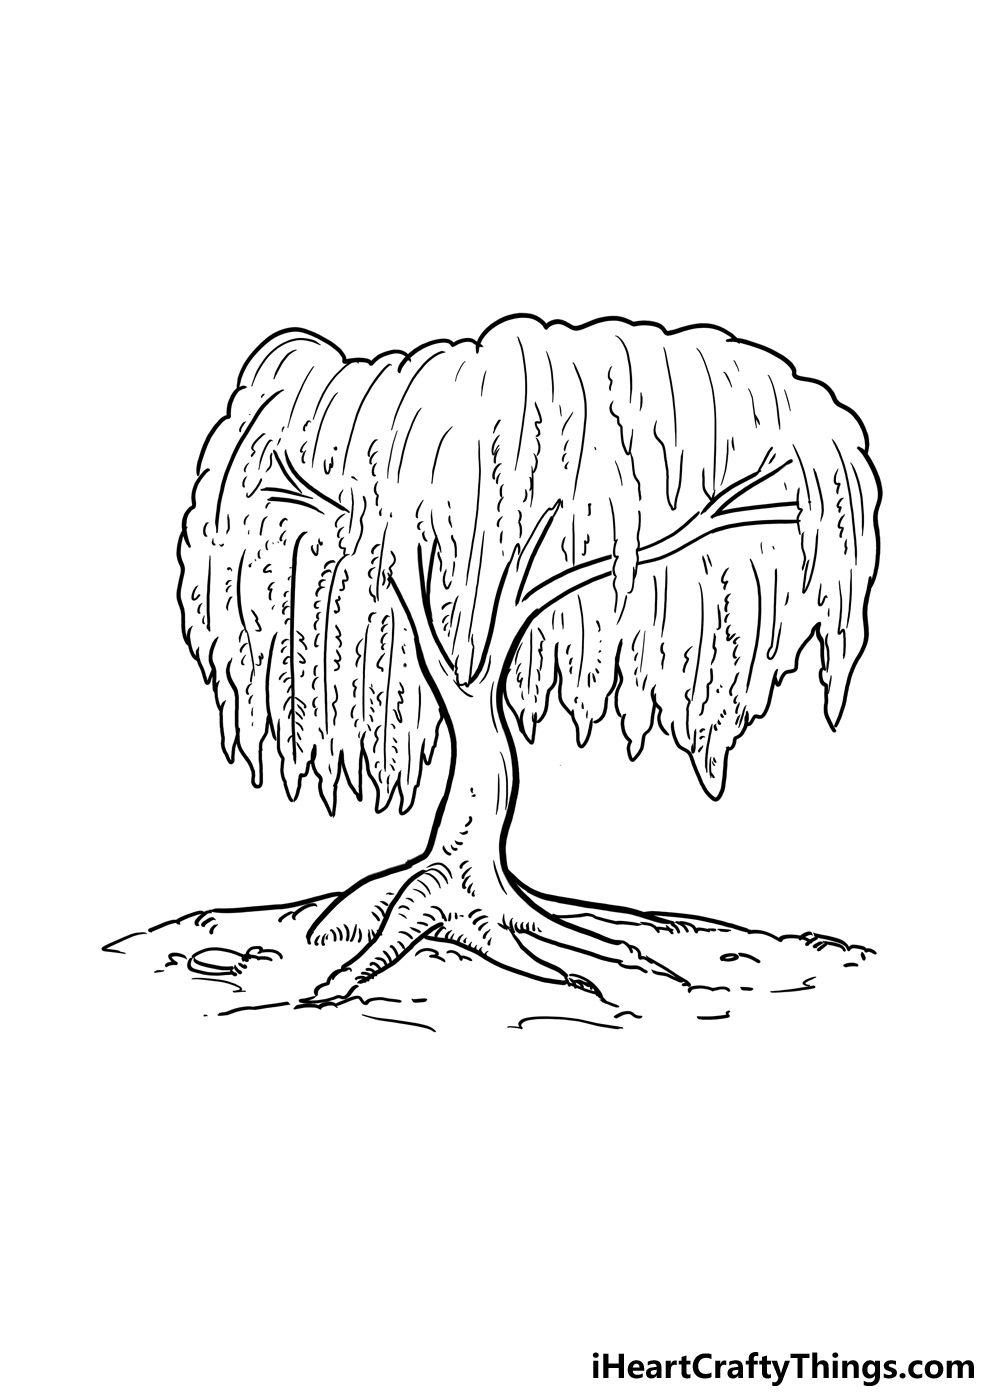 How to Draw A Willow Tree step 5